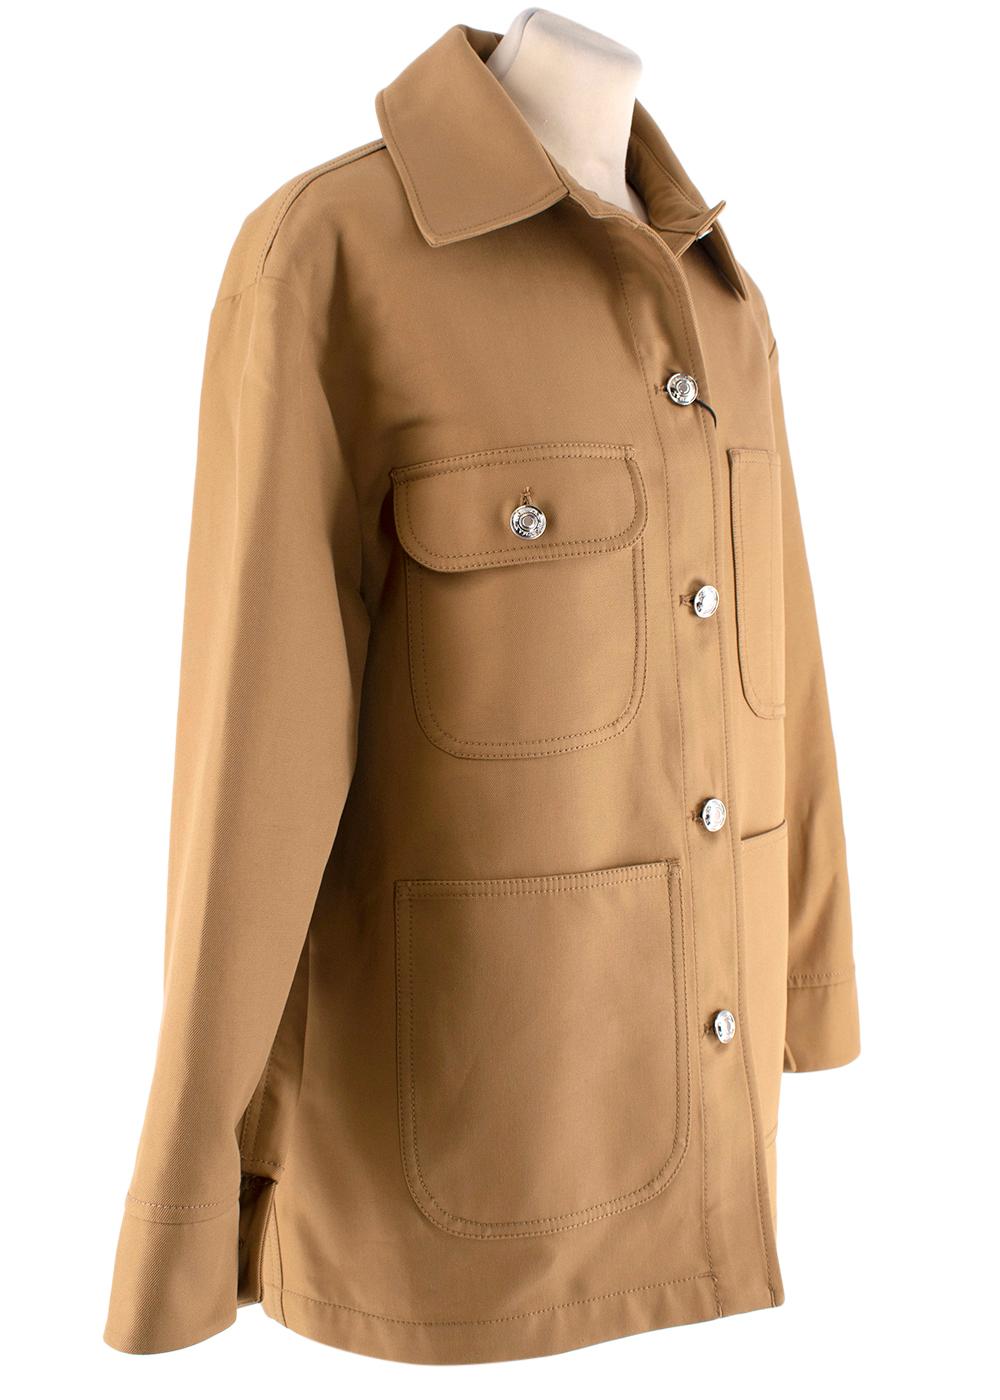 Sportmax Olmo Jacket 

-Single-breasted tobacco coloured jacket, straight cut, shirt collar, long sleeves, chest pocket with buttoned flap, buttoned fastening.

Measurements: 

Measurements:
47cm shoulder to shoulder 
45cm chest 
54cm waist 
54cm